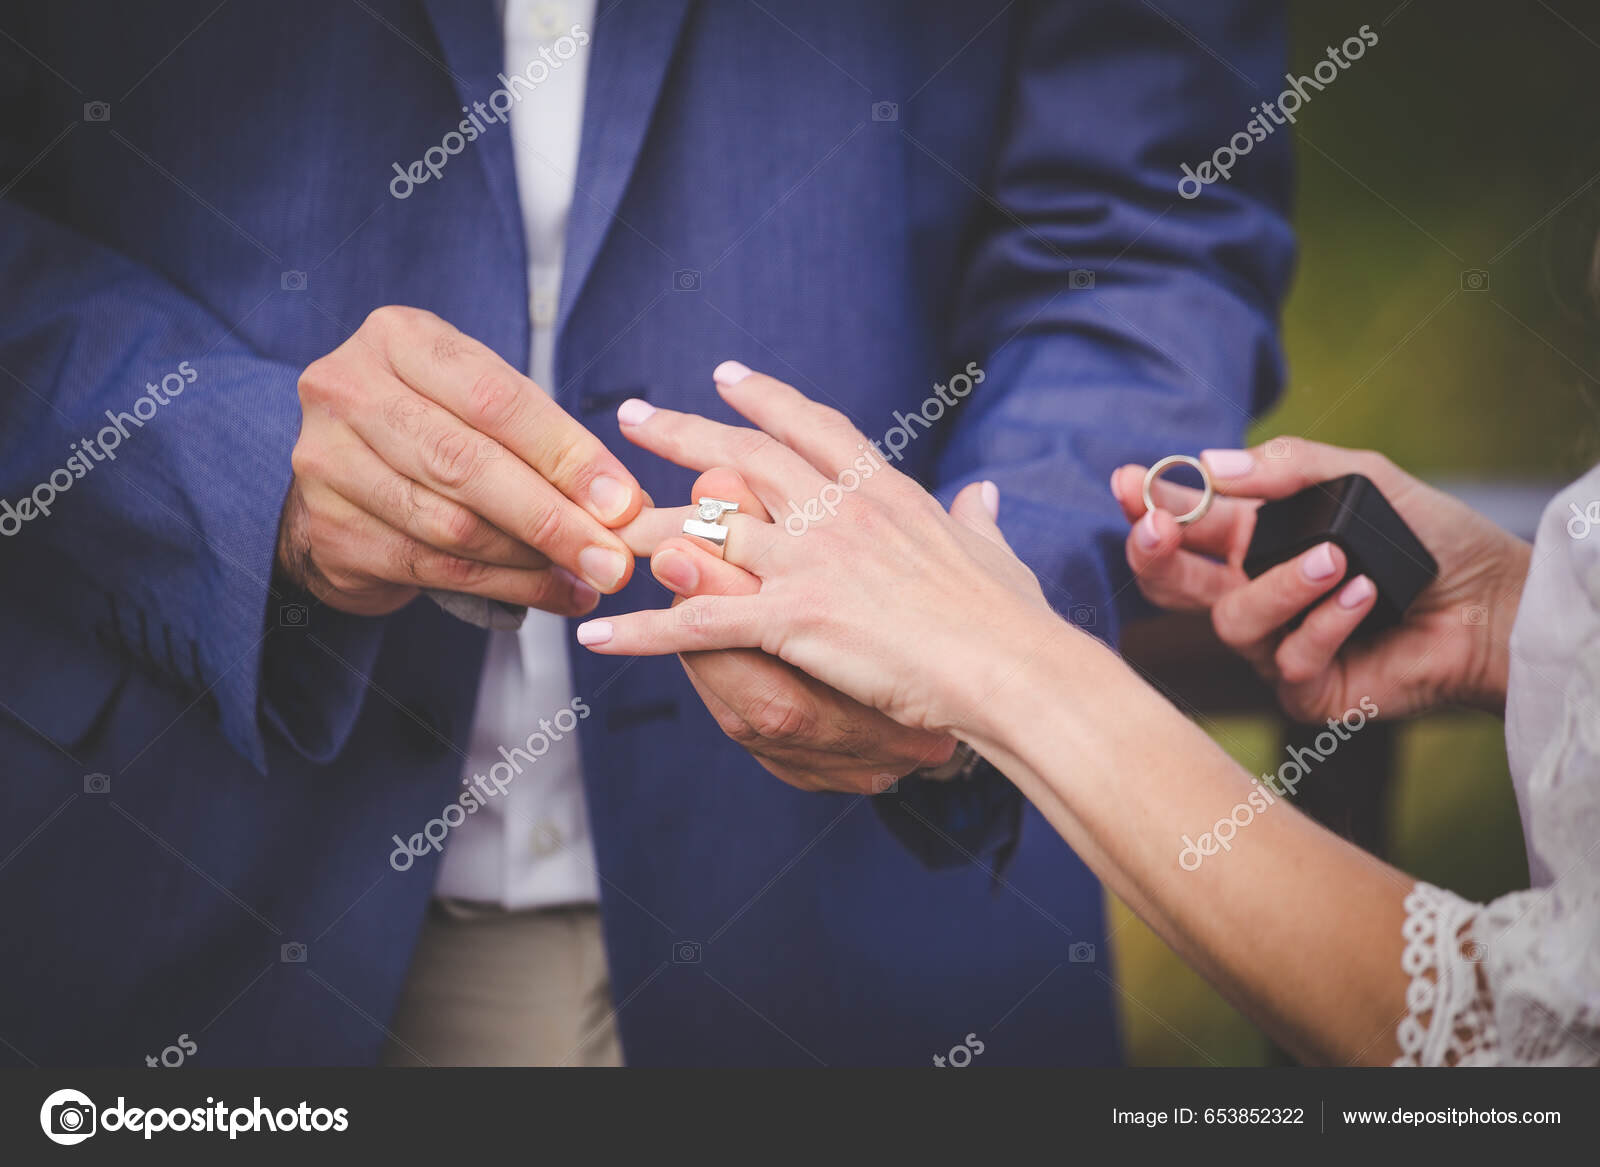 Groom Bridal Marriage Engagement Rings Proposal Stock Photo 2258549421 |  Shutterstock